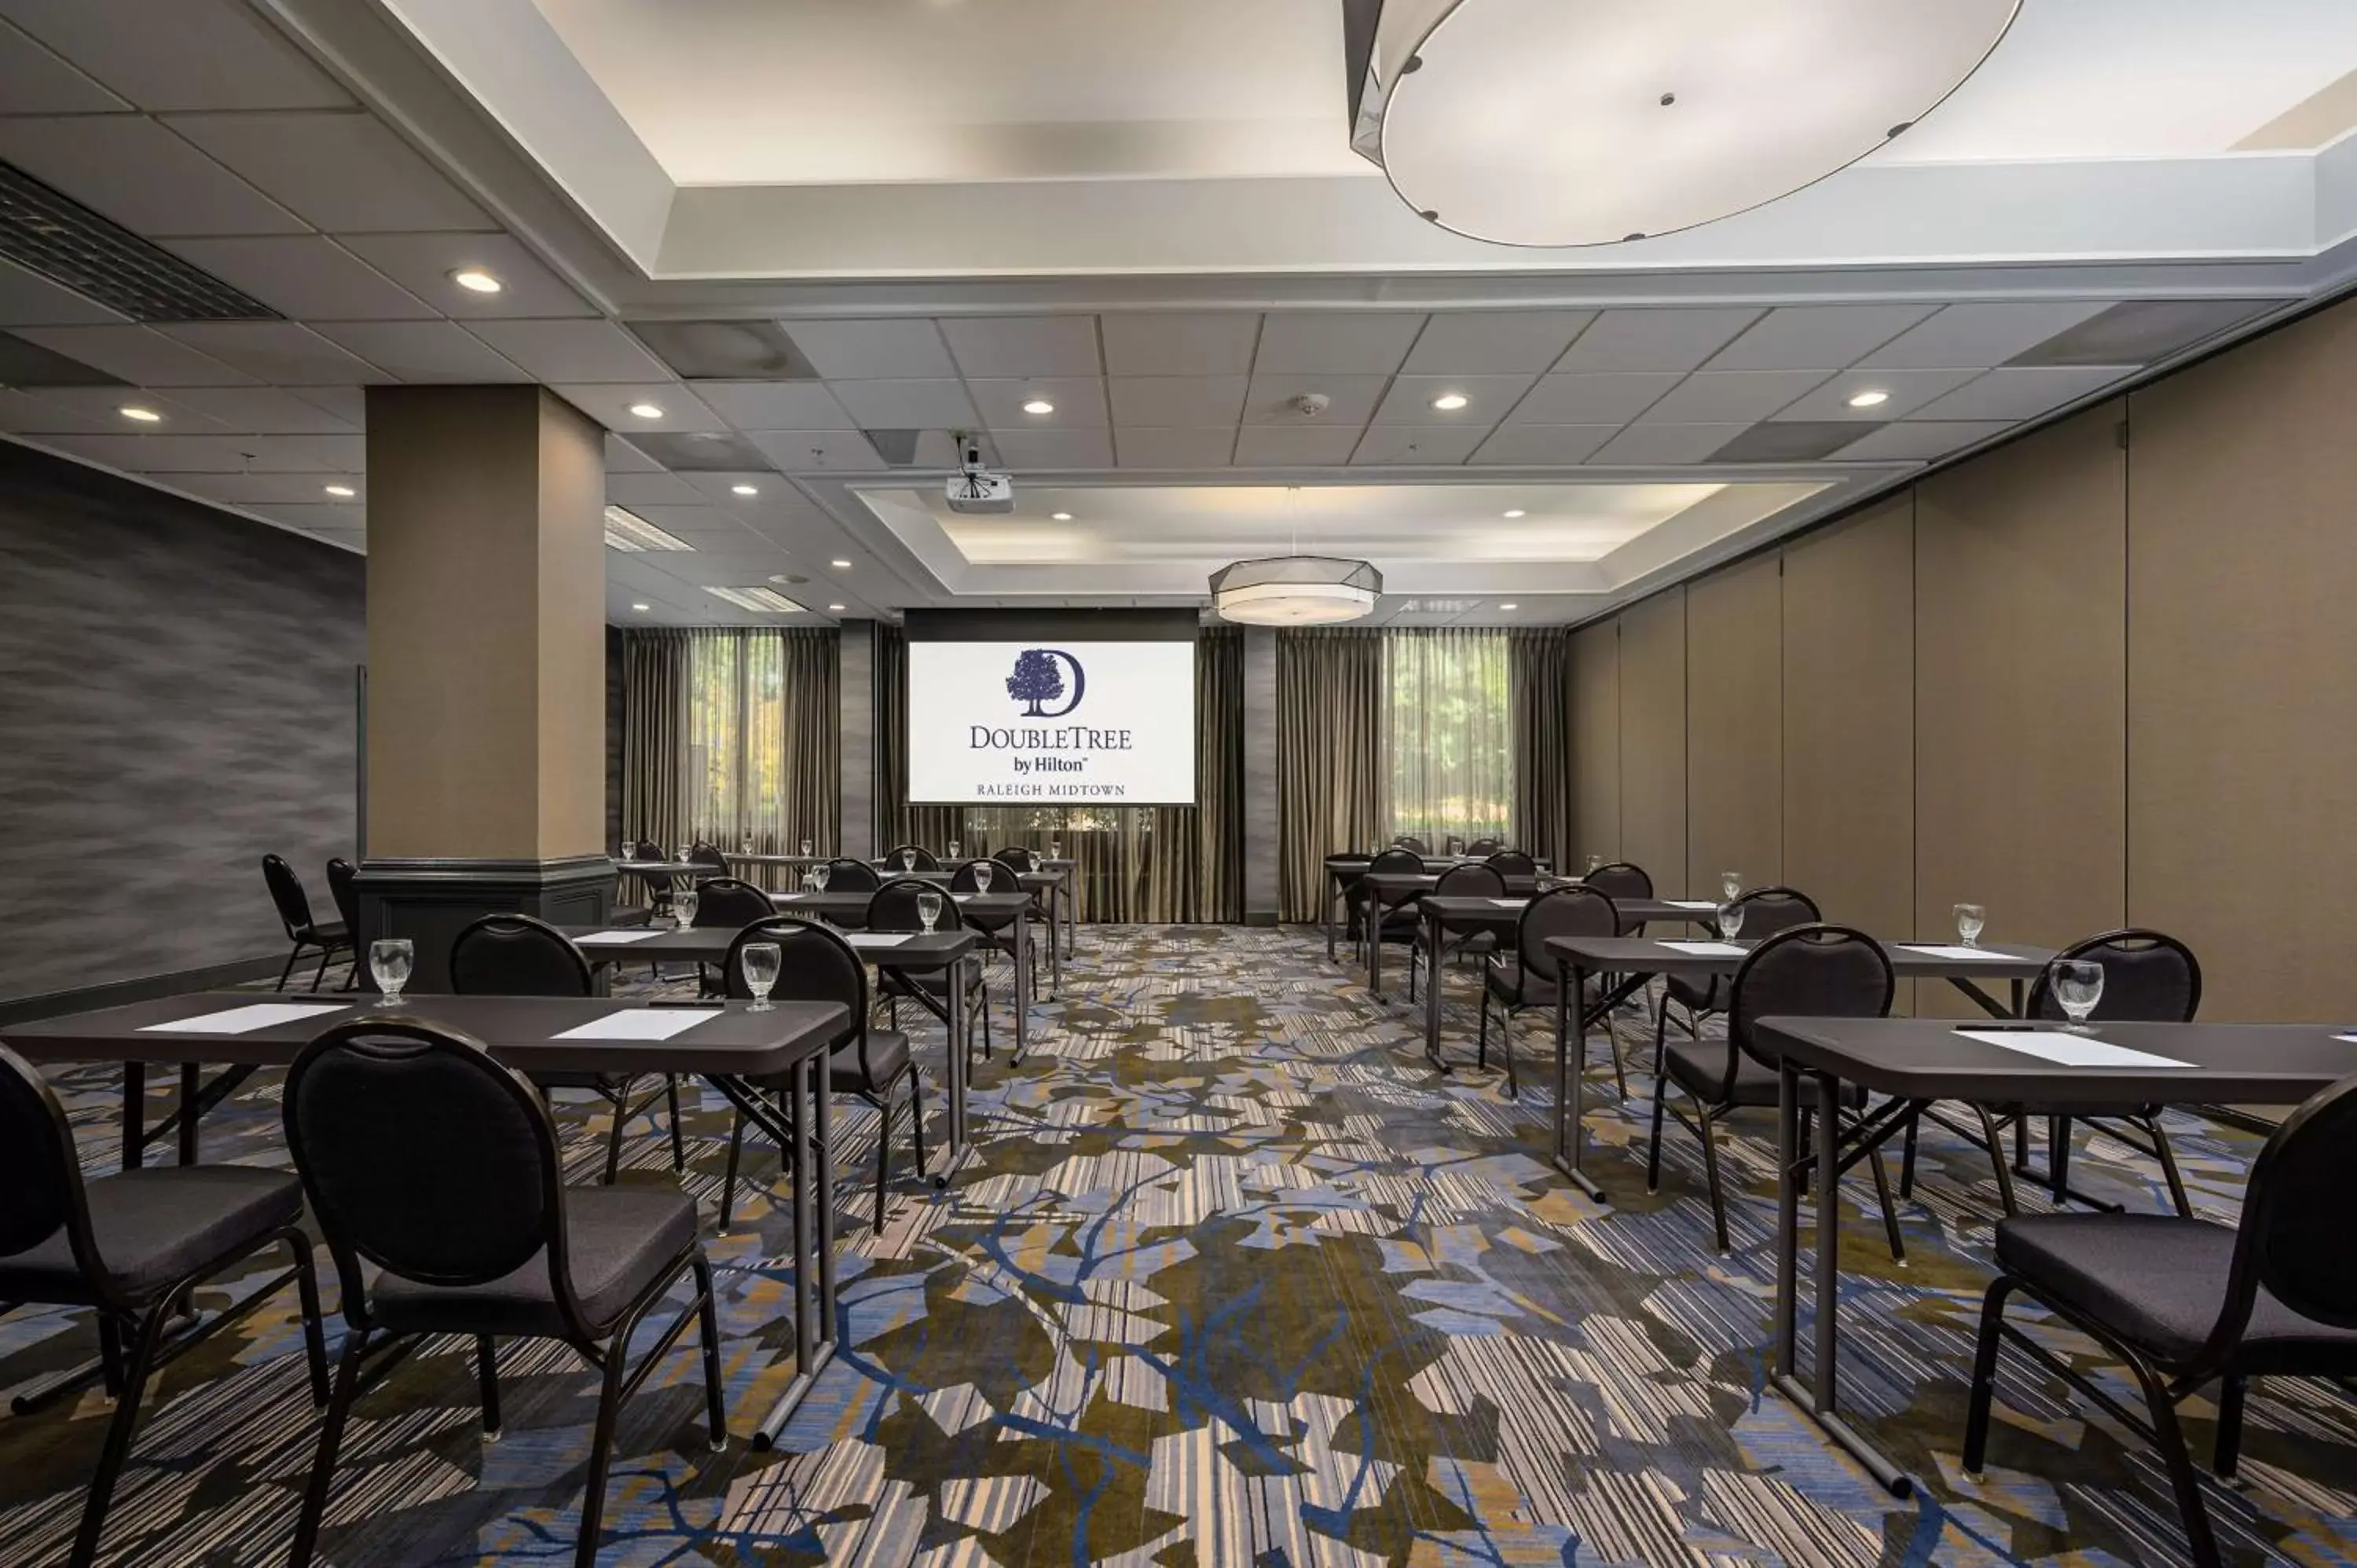 Meeting/conference room in DoubleTree by Hilton Raleigh Midtown, NC